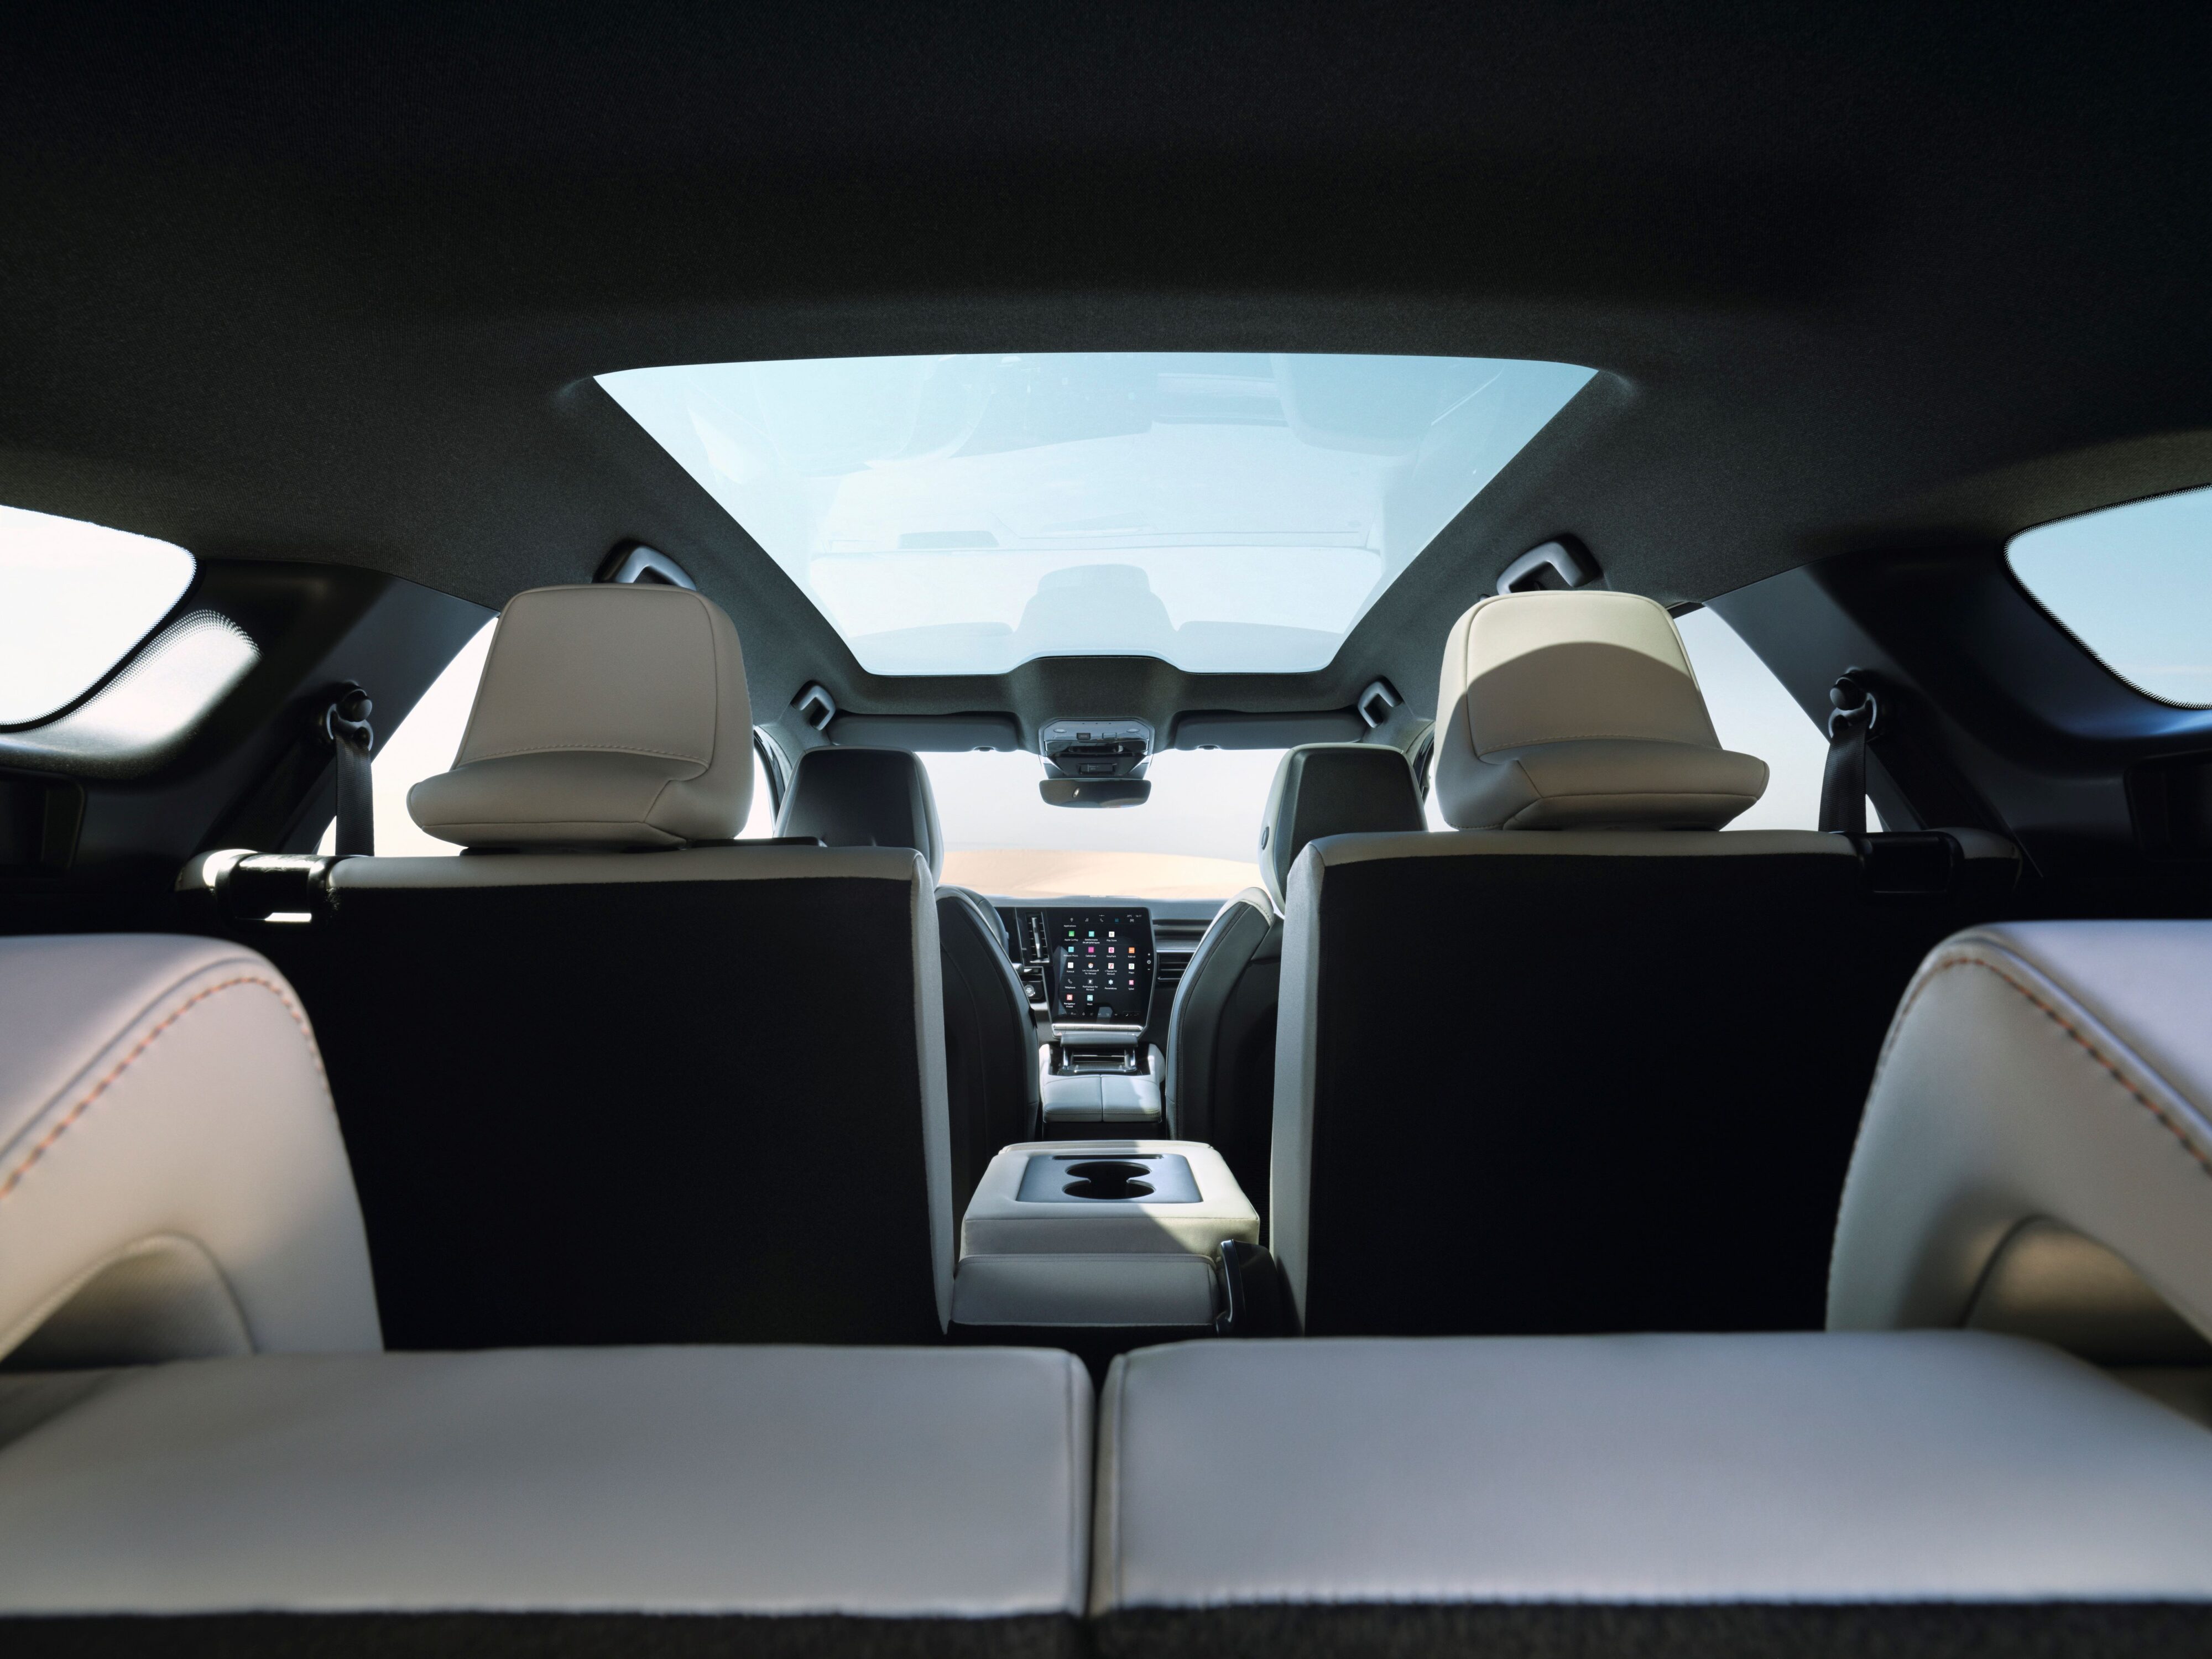 Interior view of the panoramic sunroof on the new Renault Espace